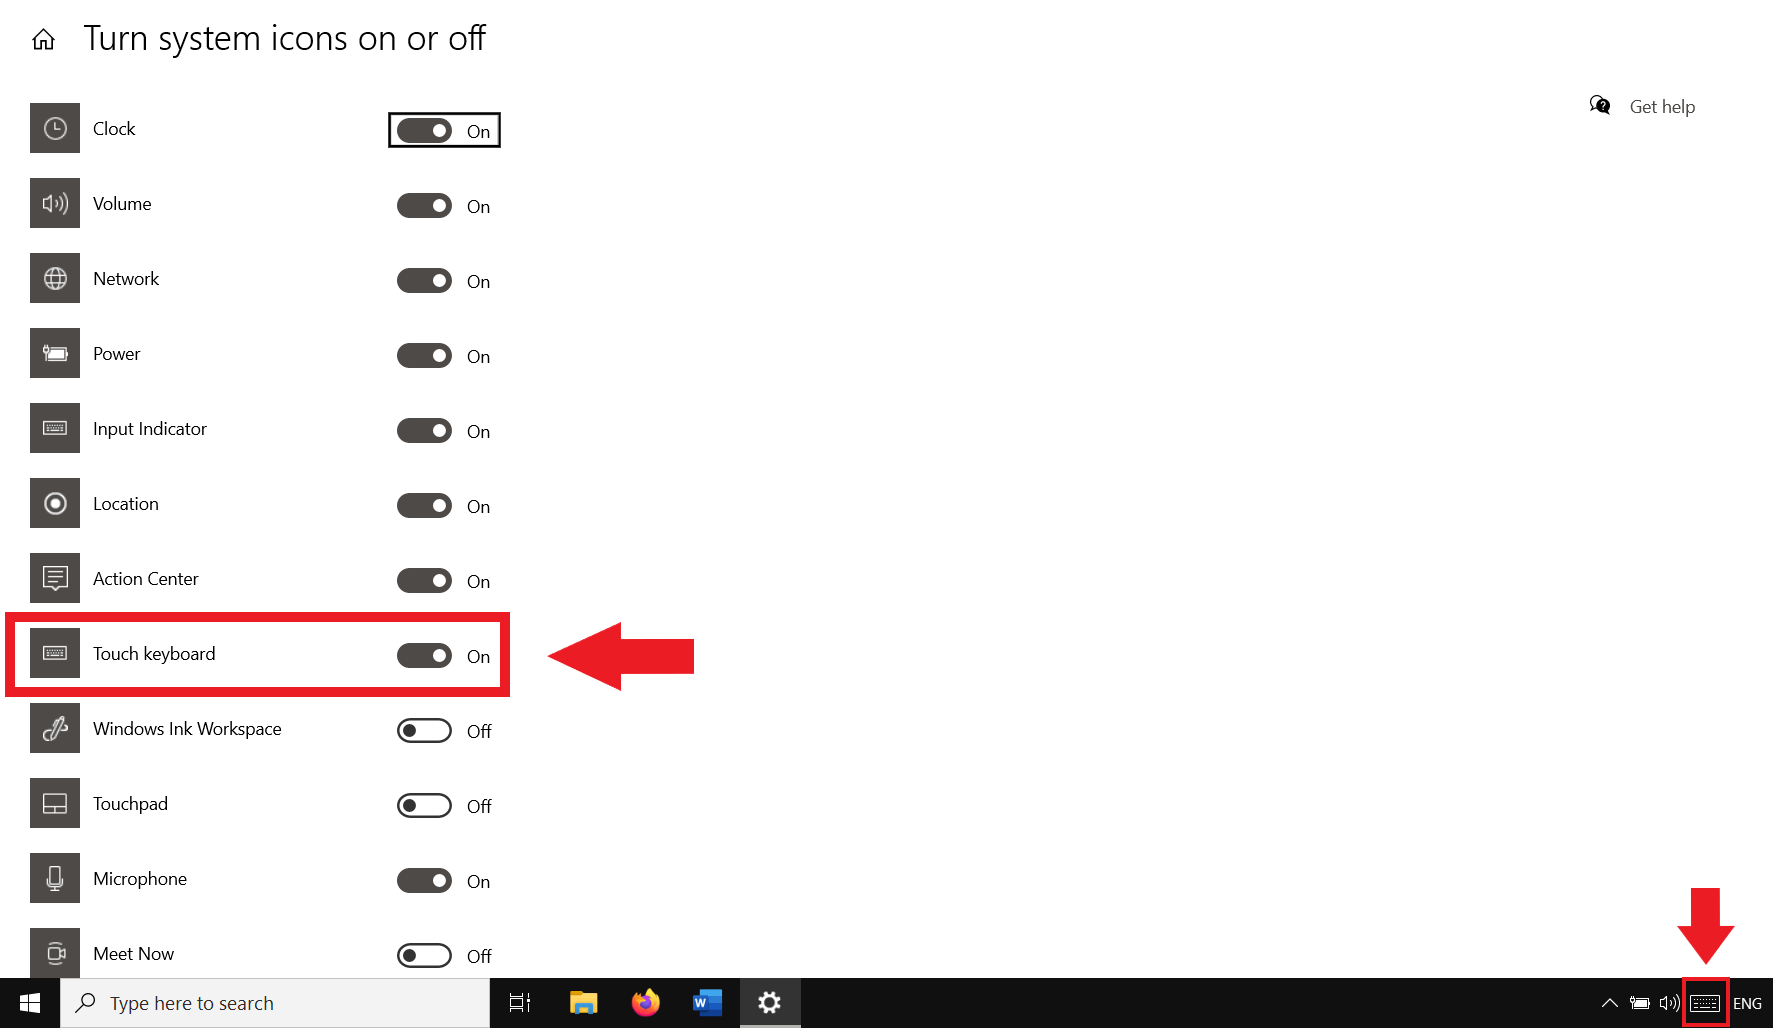 Once the slider is set to “On”, the on-screen keyboard is pinned to the bottom right of the taskbar